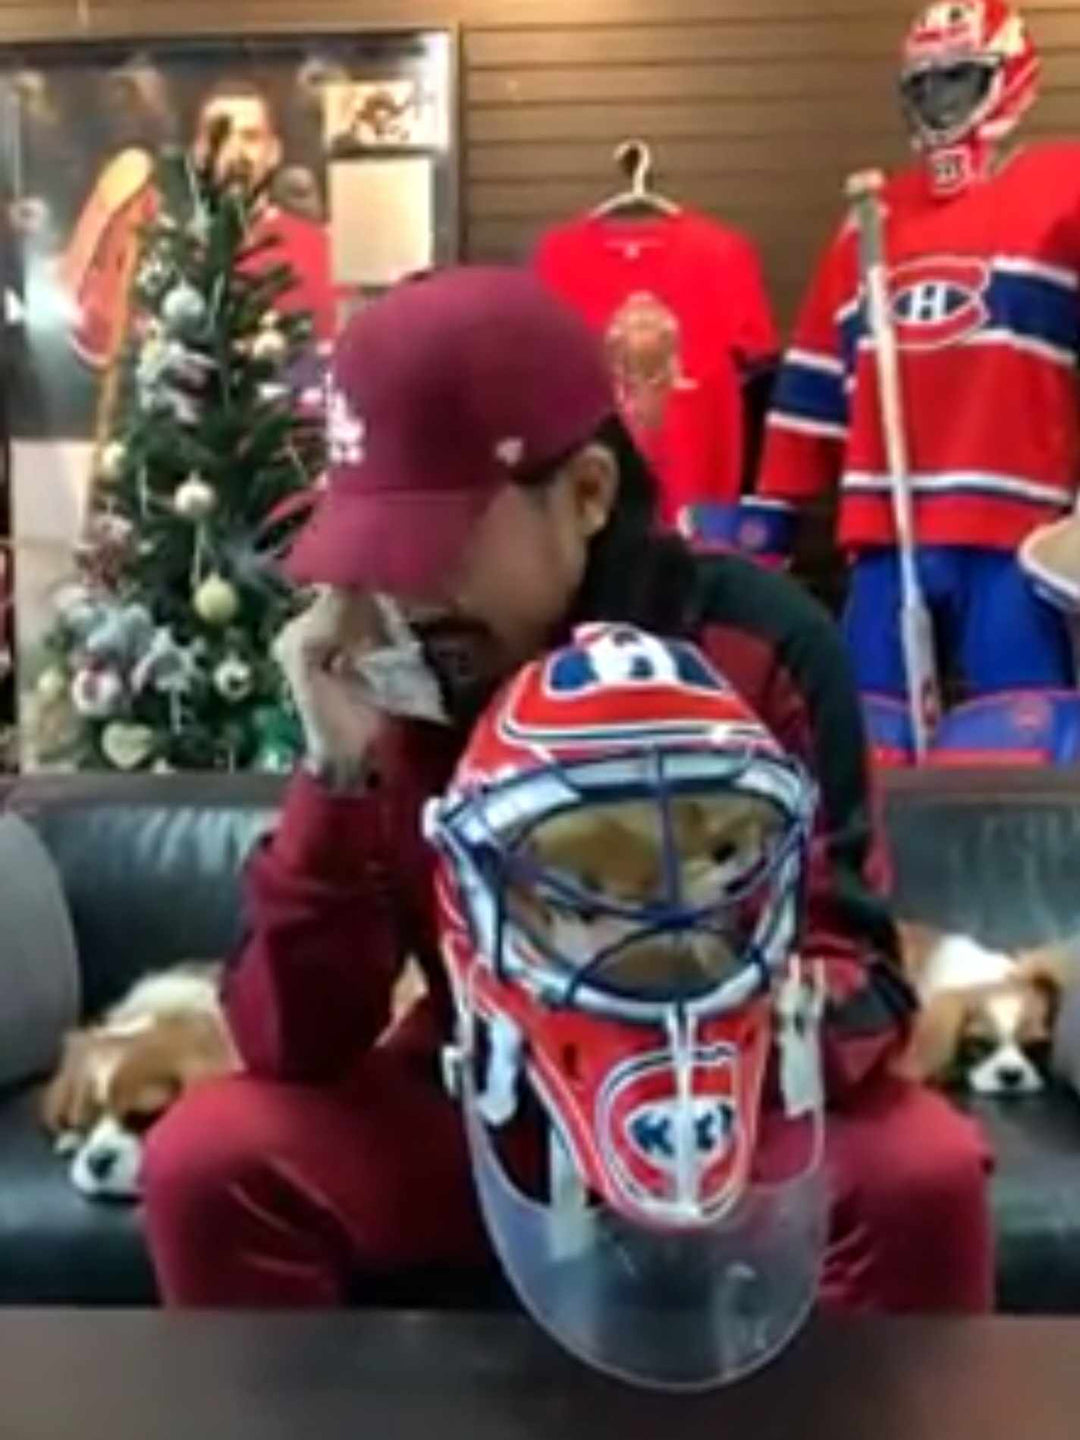 Story Time: Patrick Roy 1994 Worn Goalie Mask Montreal Canadiens